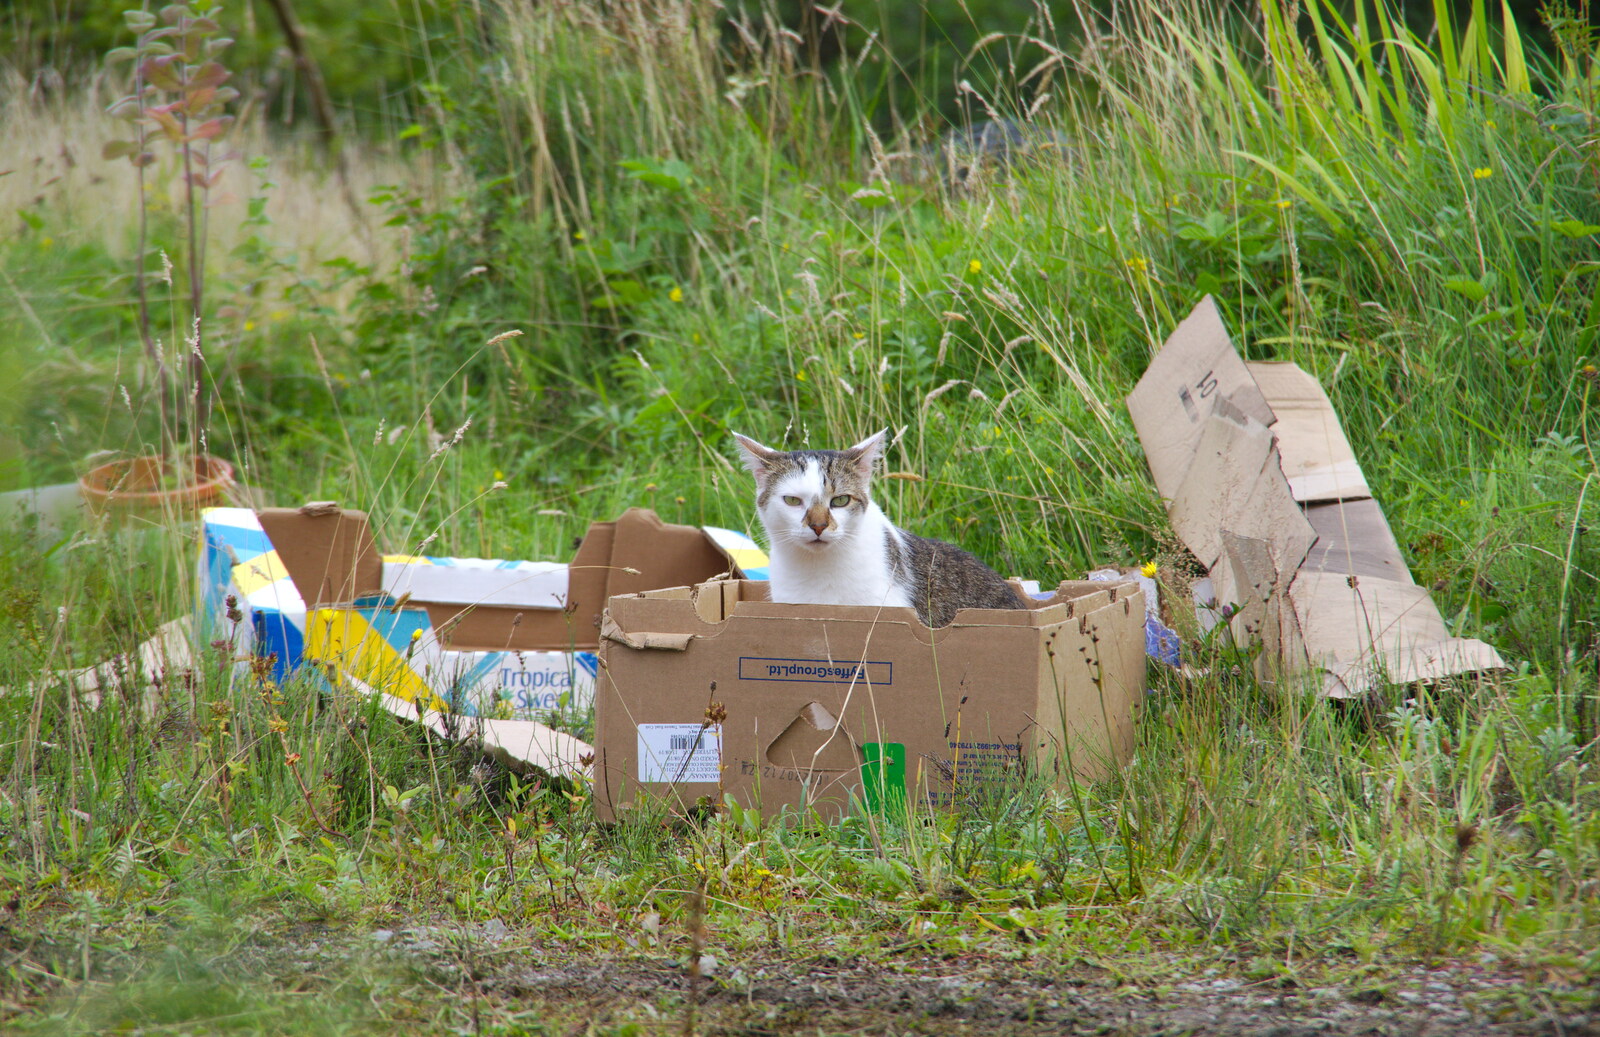 Cat in a box from Glencar Waterfall and Parke's Castle, Kilmore, Leitrim, Ireland - 18th August 2019